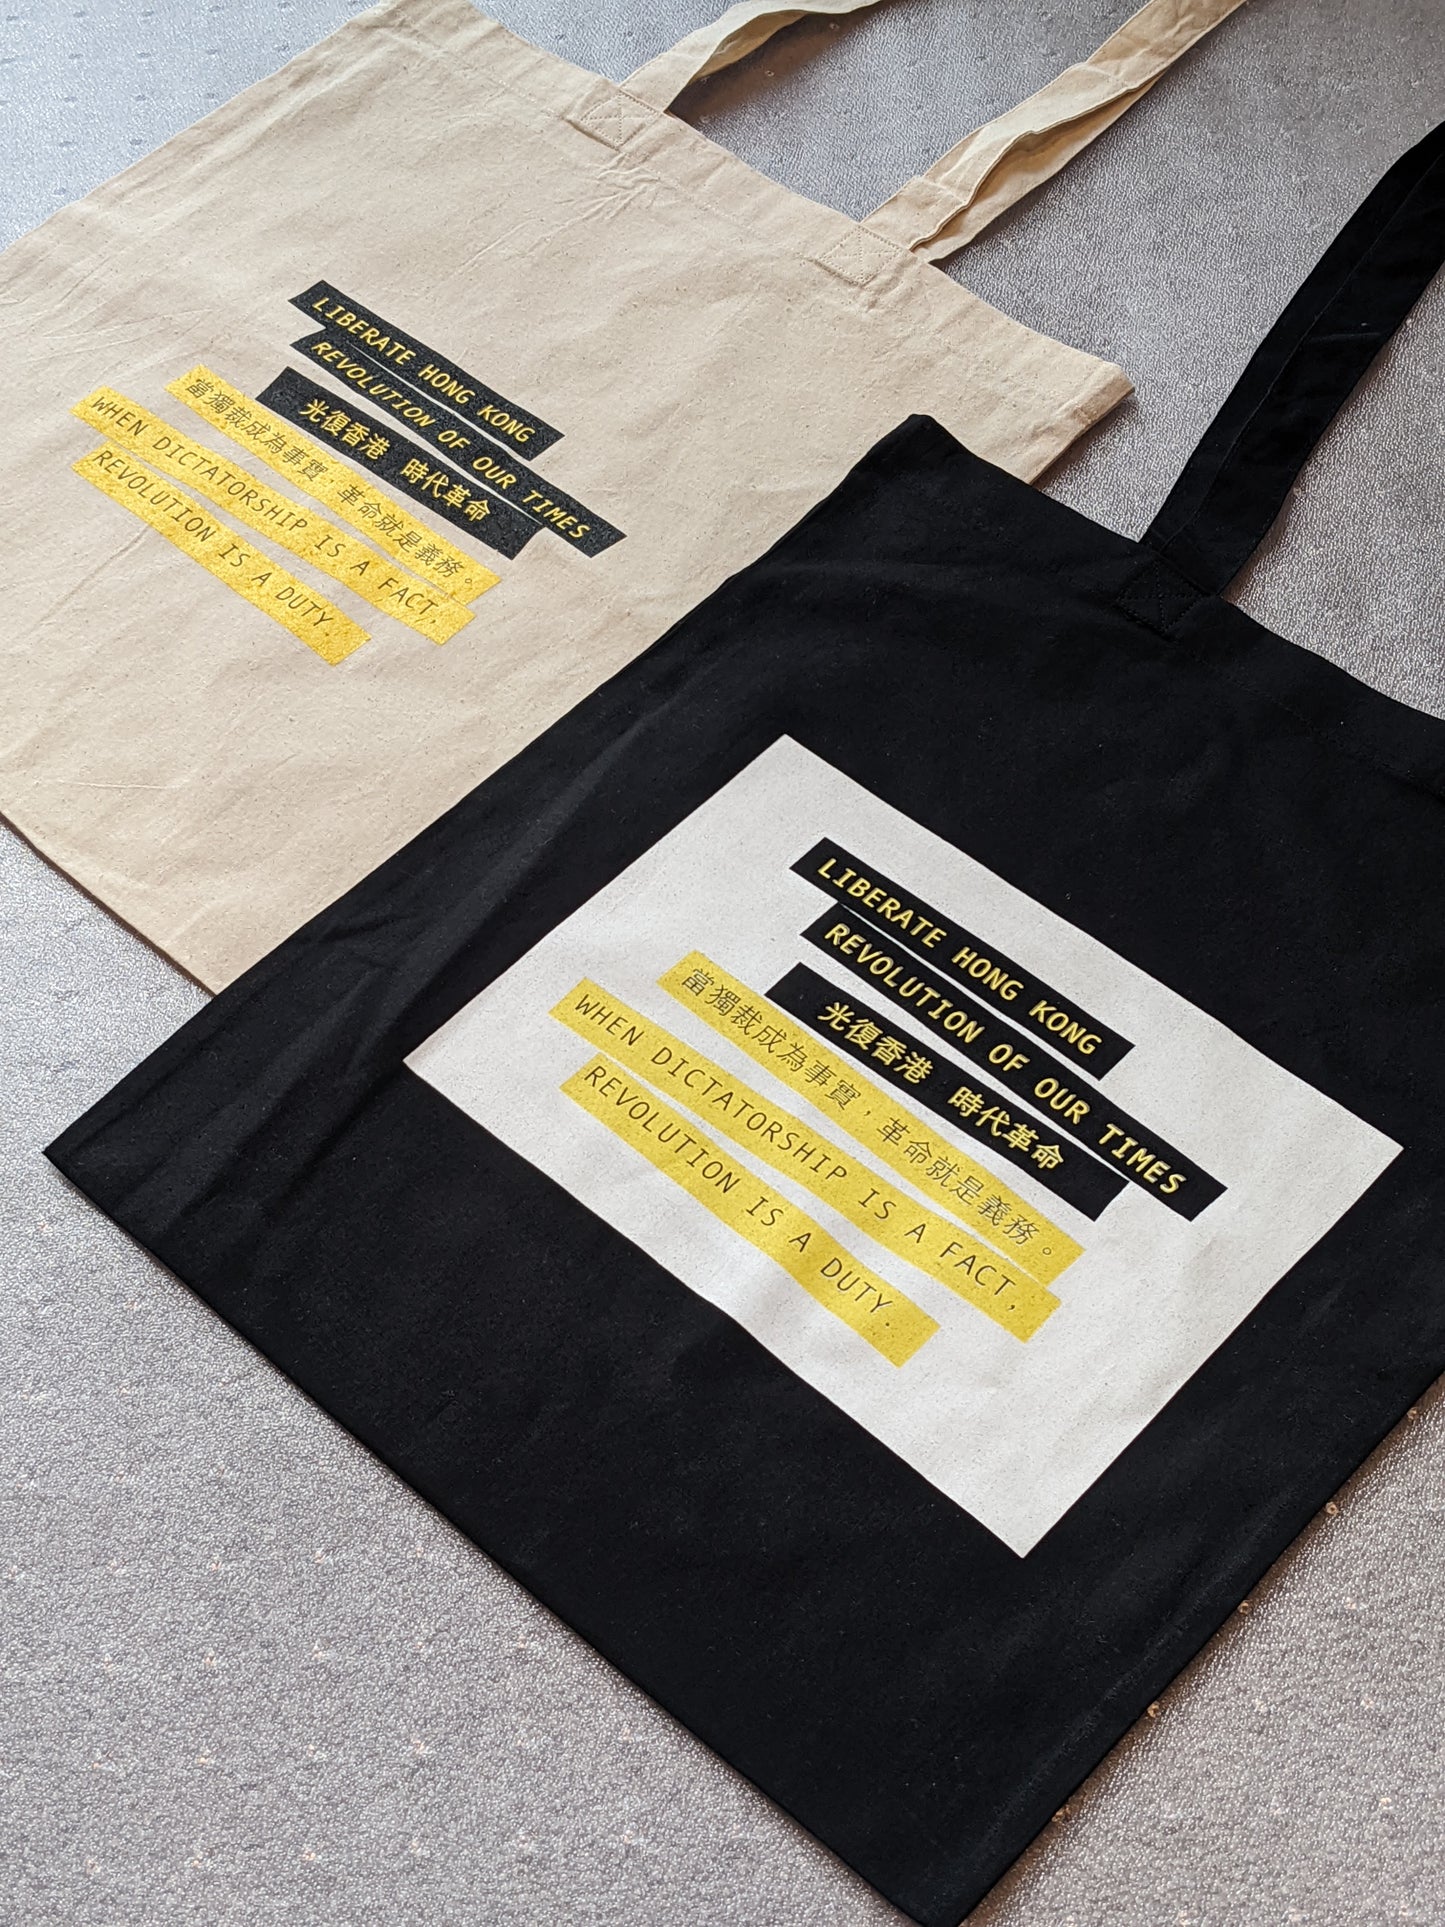 Revolution is a DUTY Tote Bag 🇵🇱 Printed in Poland 🇮🇳 Origin from India